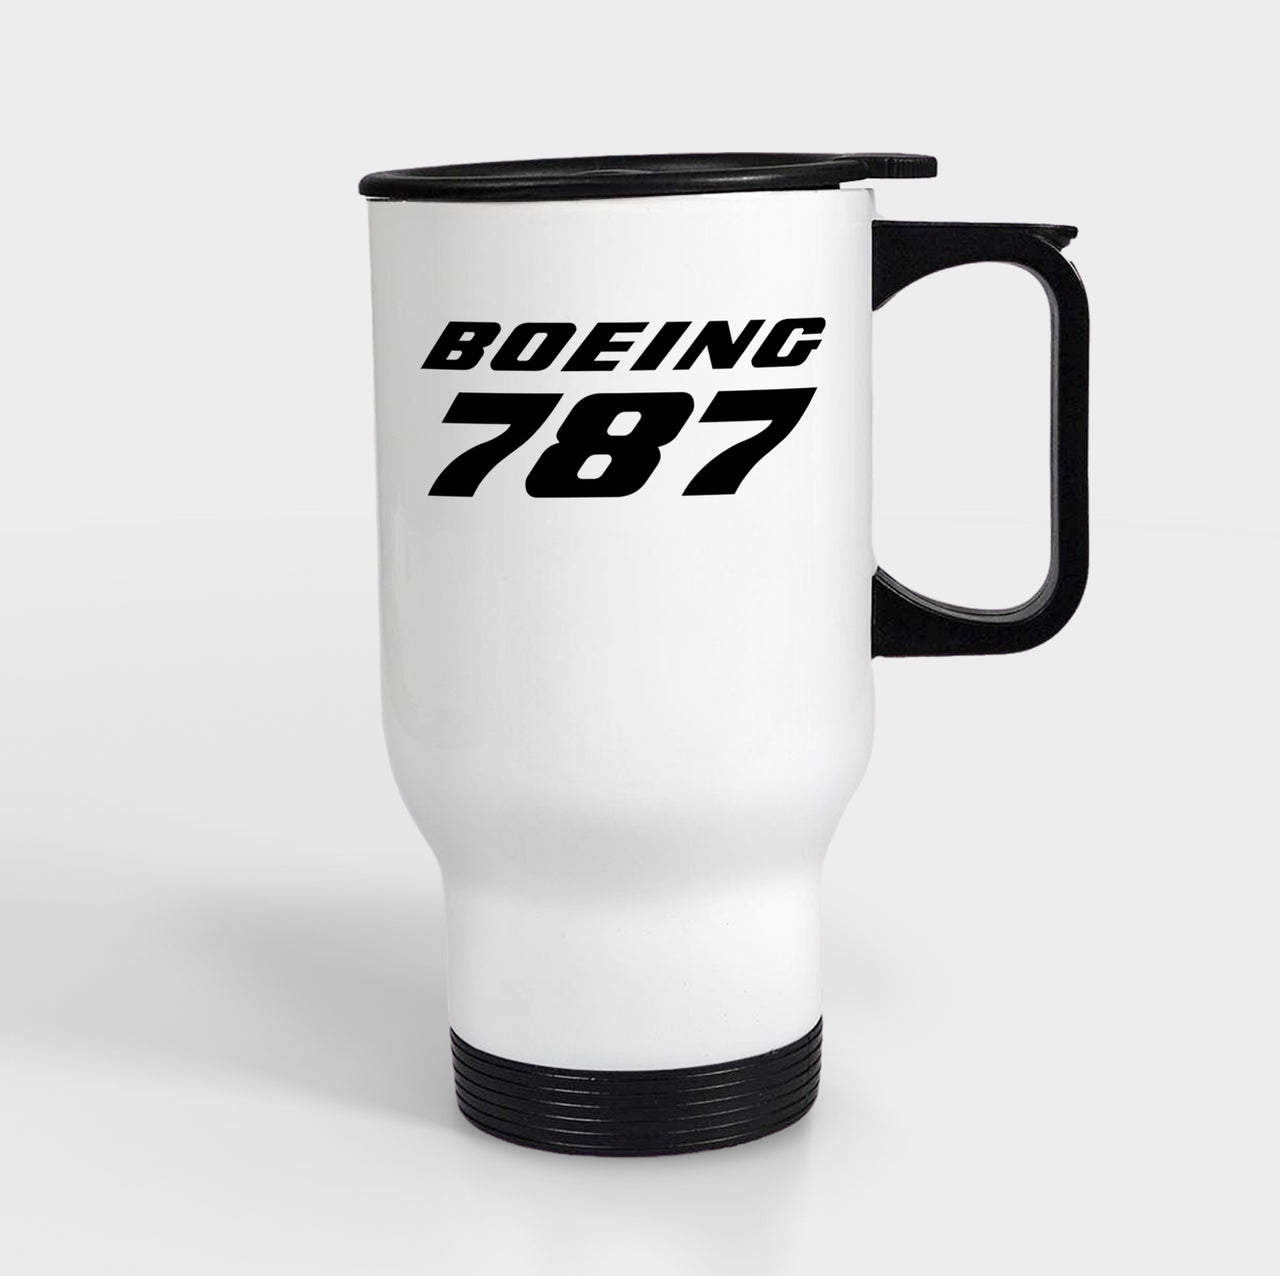 Boeing 787 & Text Designed Travel Mugs (With Holder)